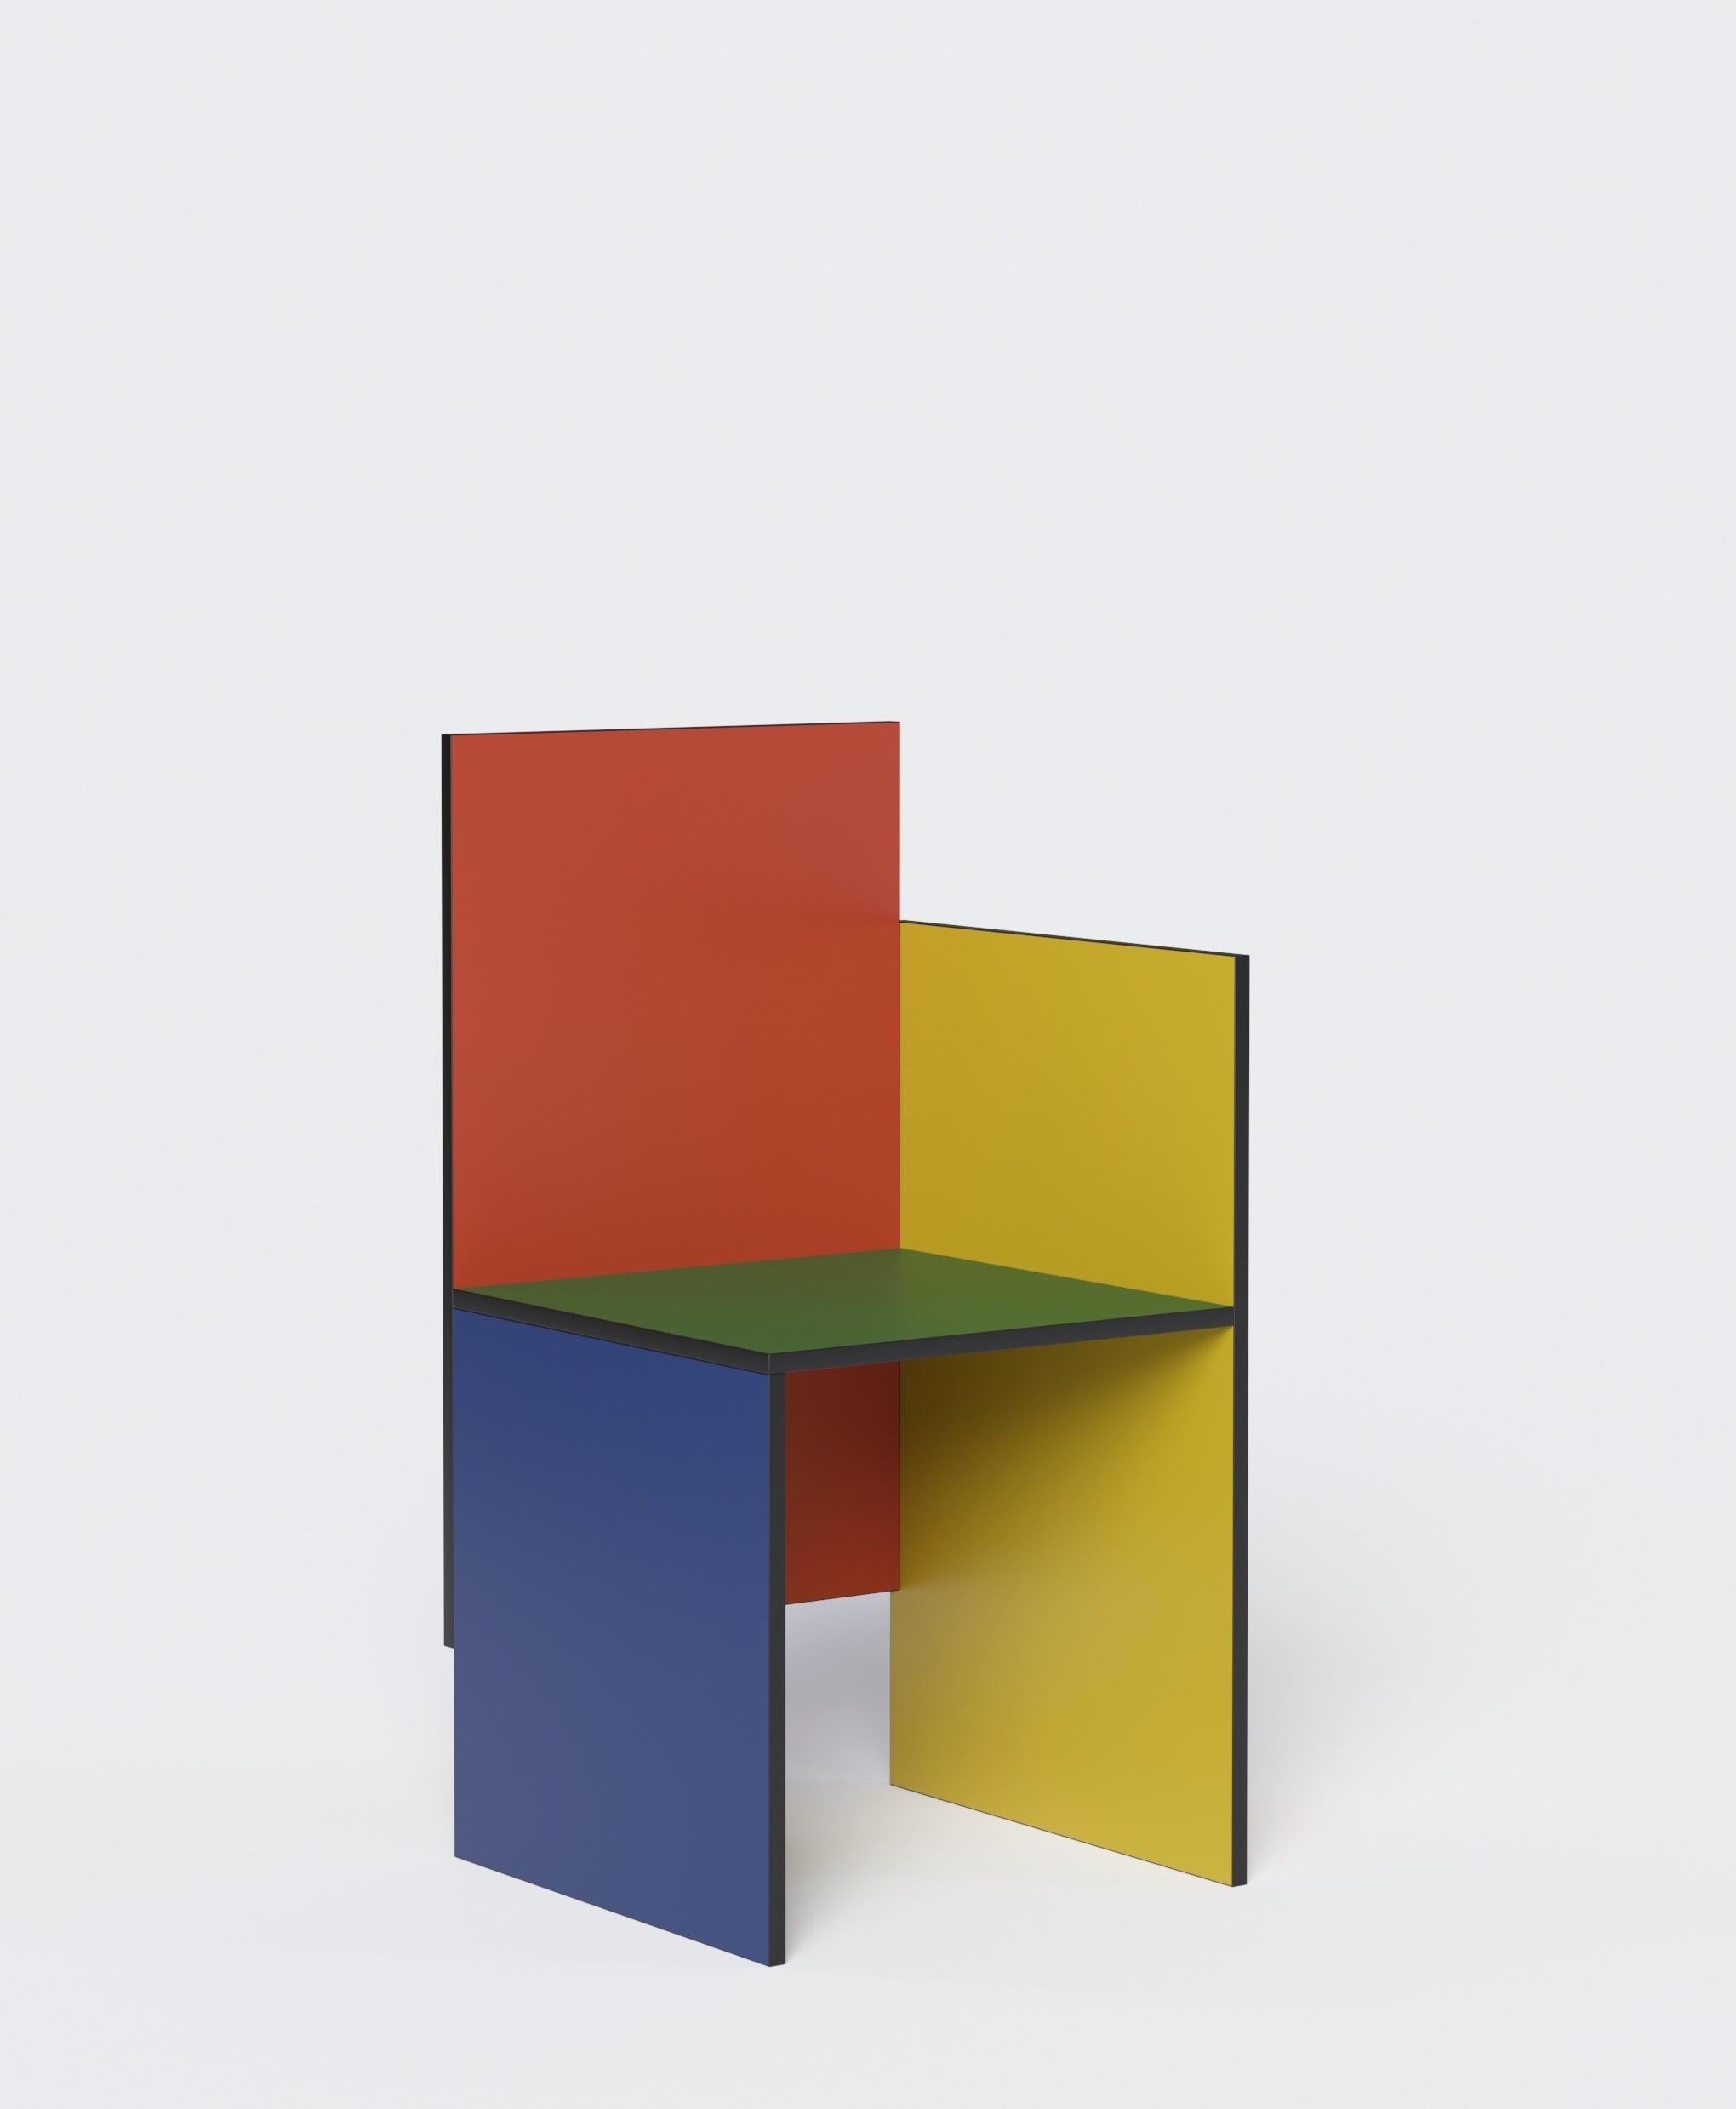 Geometric and Minimalist chair by Russian designer Dmitry Samygin. Inspired by Gerrit Rietveld and Bauhaus style. 

Plywood
Measures: 88.5 x 45 x 45 cm

Choose your color! 

Two versions:
- One arm (right or left)
- Two arms.